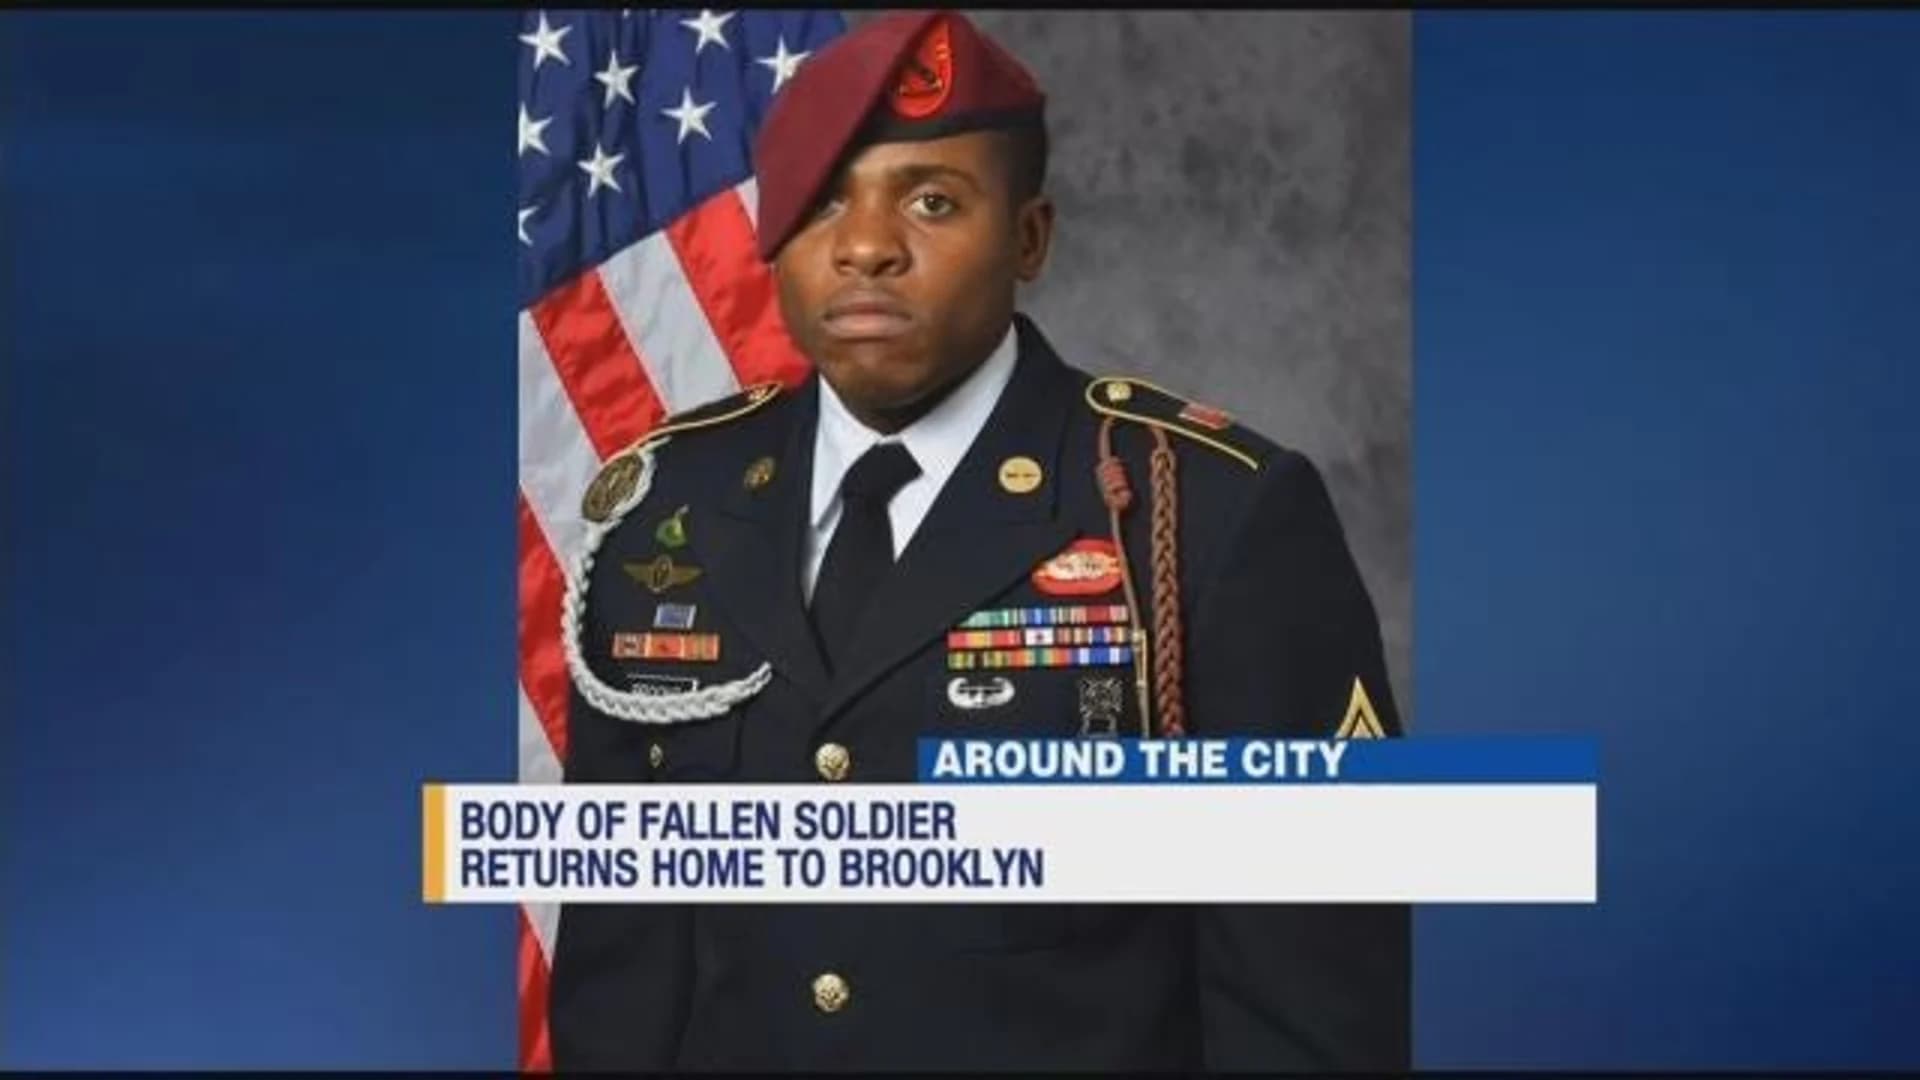 Remains of Army sergeant slain in Iraq return to NY